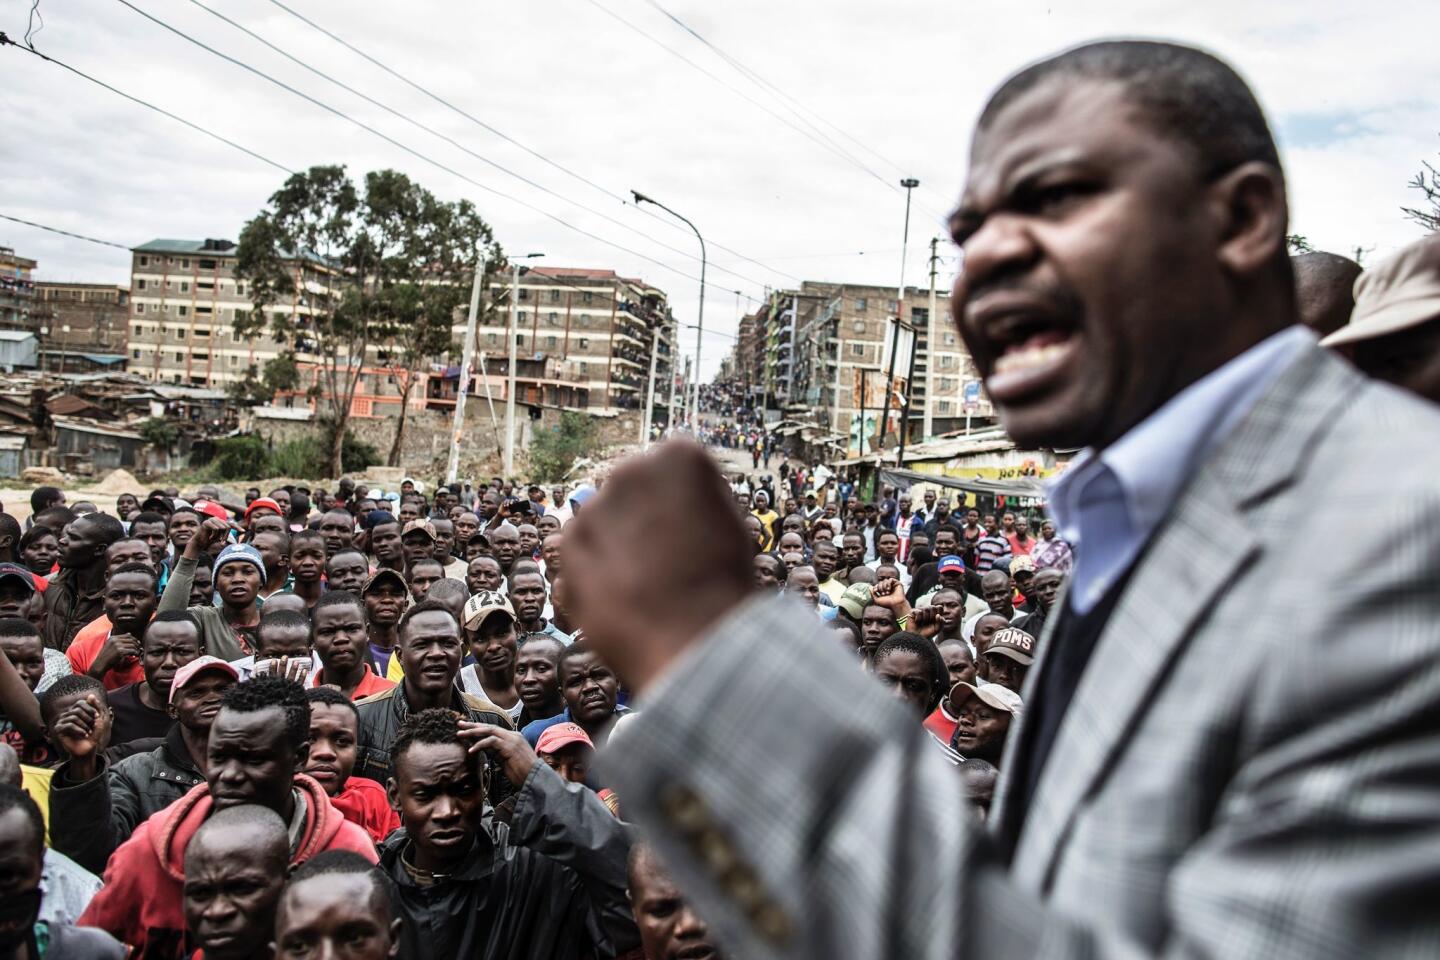 Protests rage in Nairobi after election results